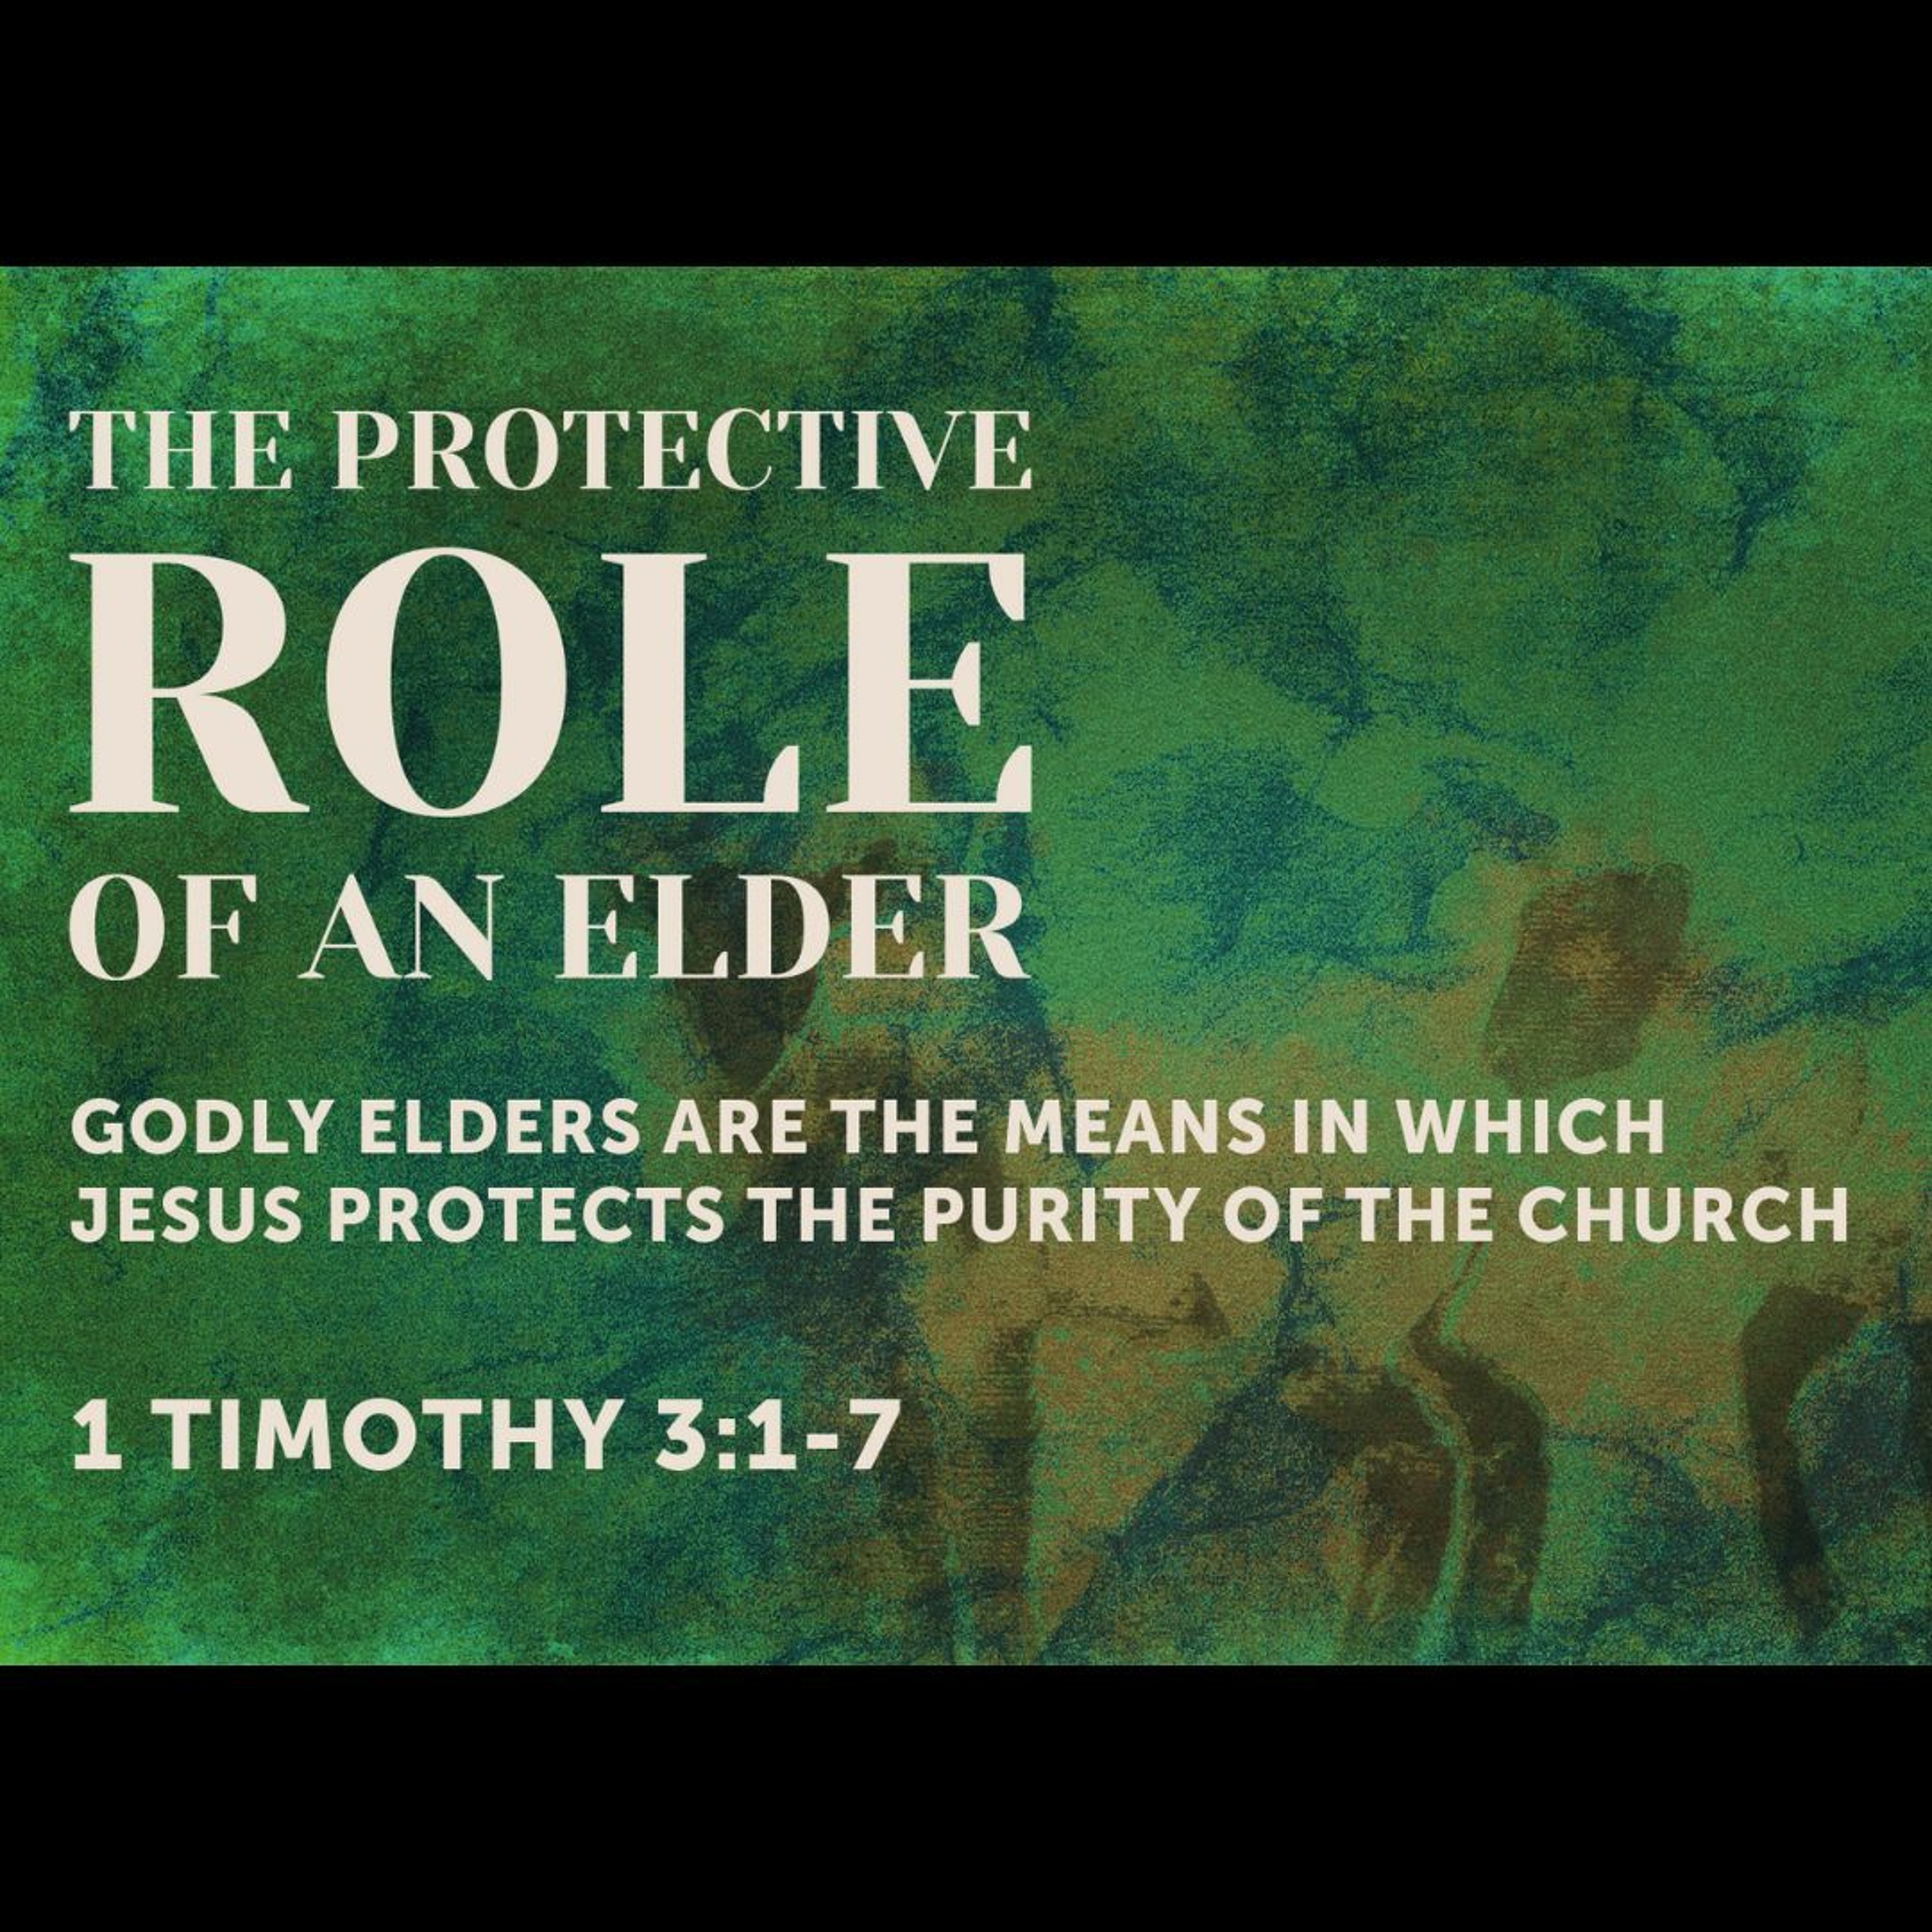 The Protective Role of an Elder (1 Timothy 3:1-7)